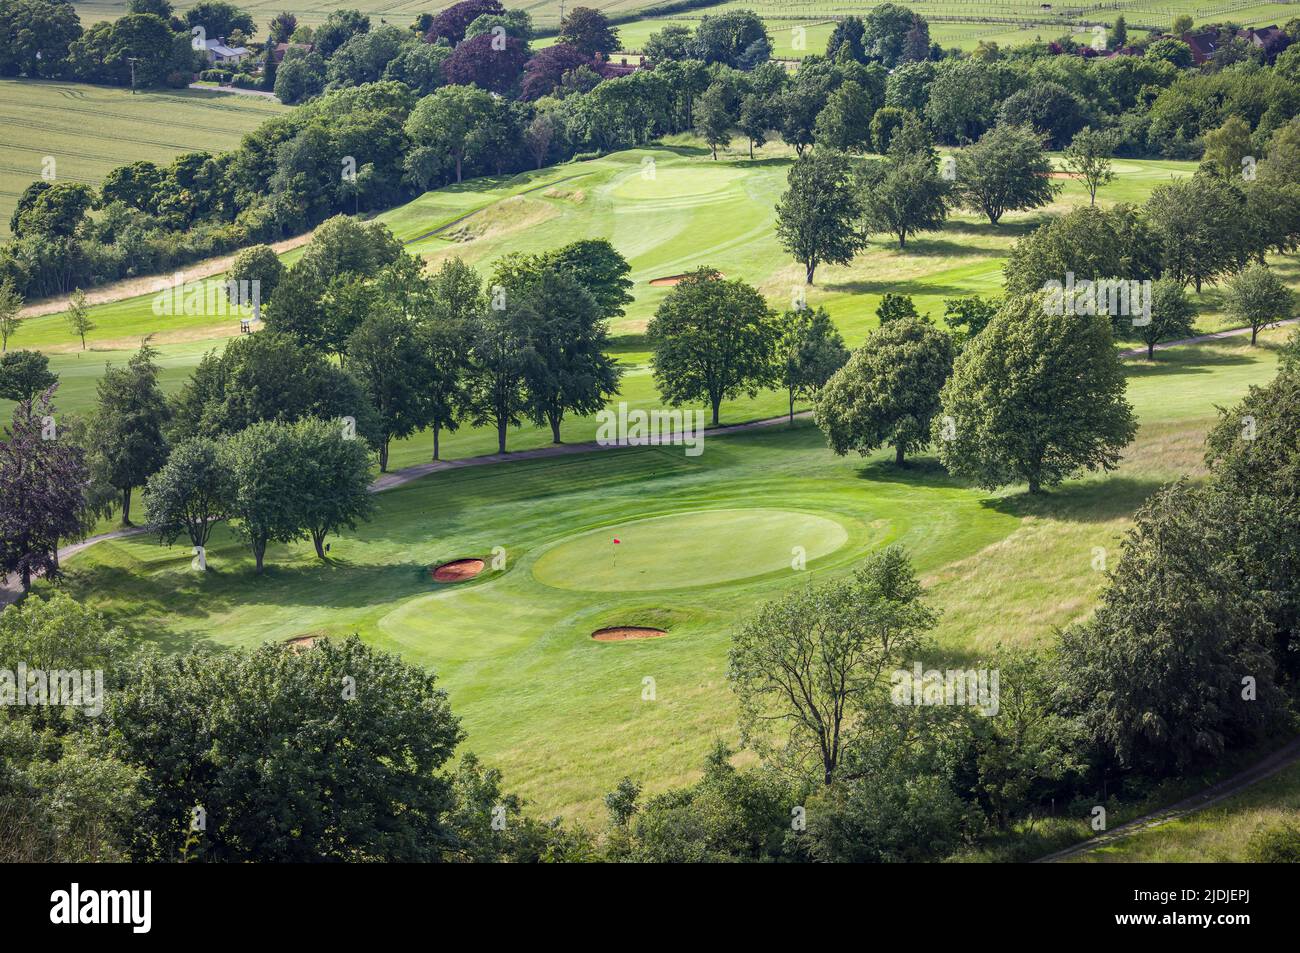 Golfing landscape with trees, aerial view of English golf course, Buckinghamshire, England, UK Stock Photo